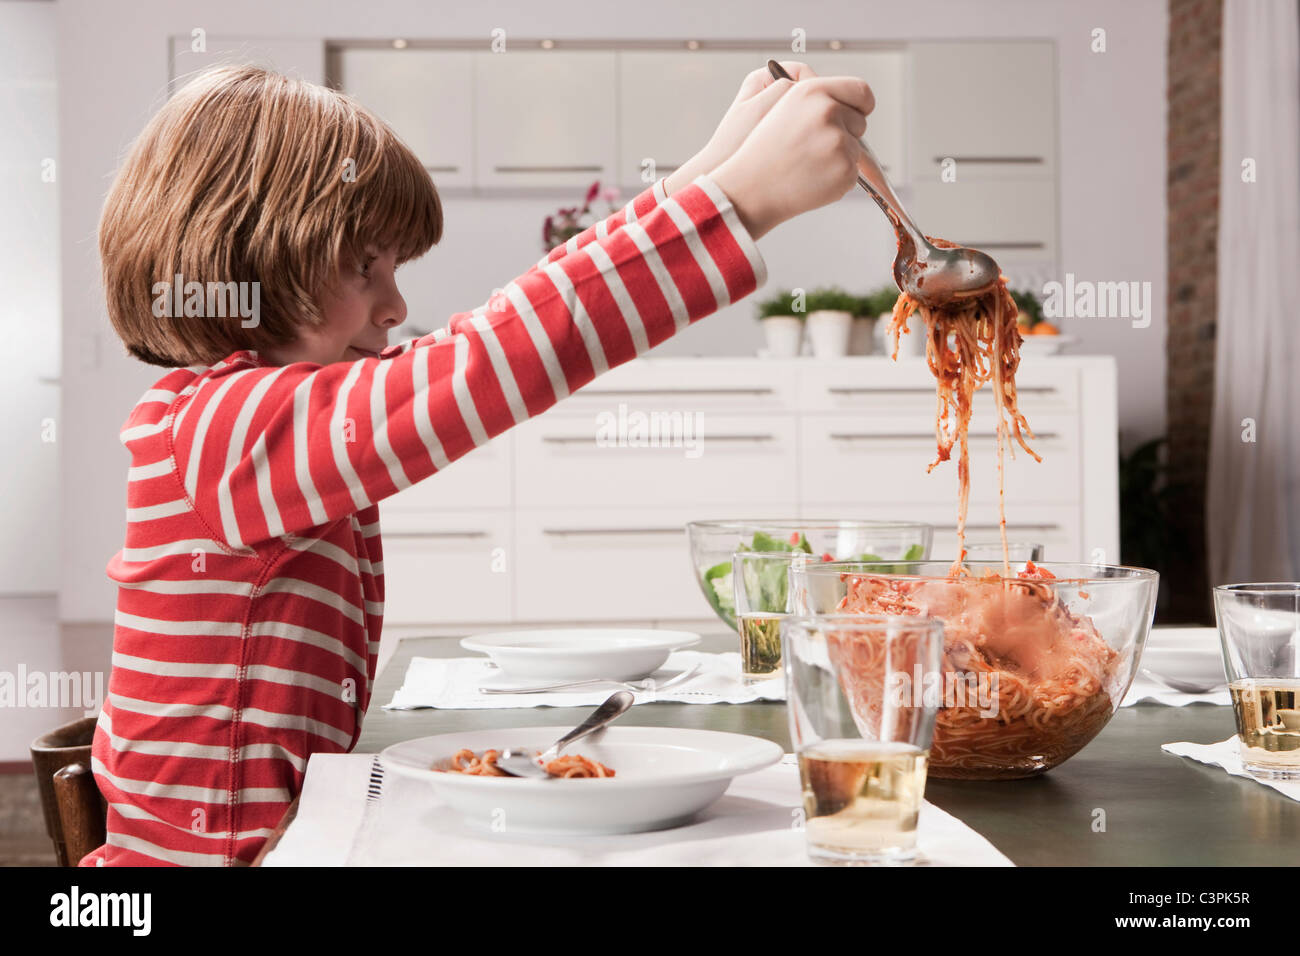 Germany, Cologne, Boy (6-7) serving spaghetti, side view Stock Photo